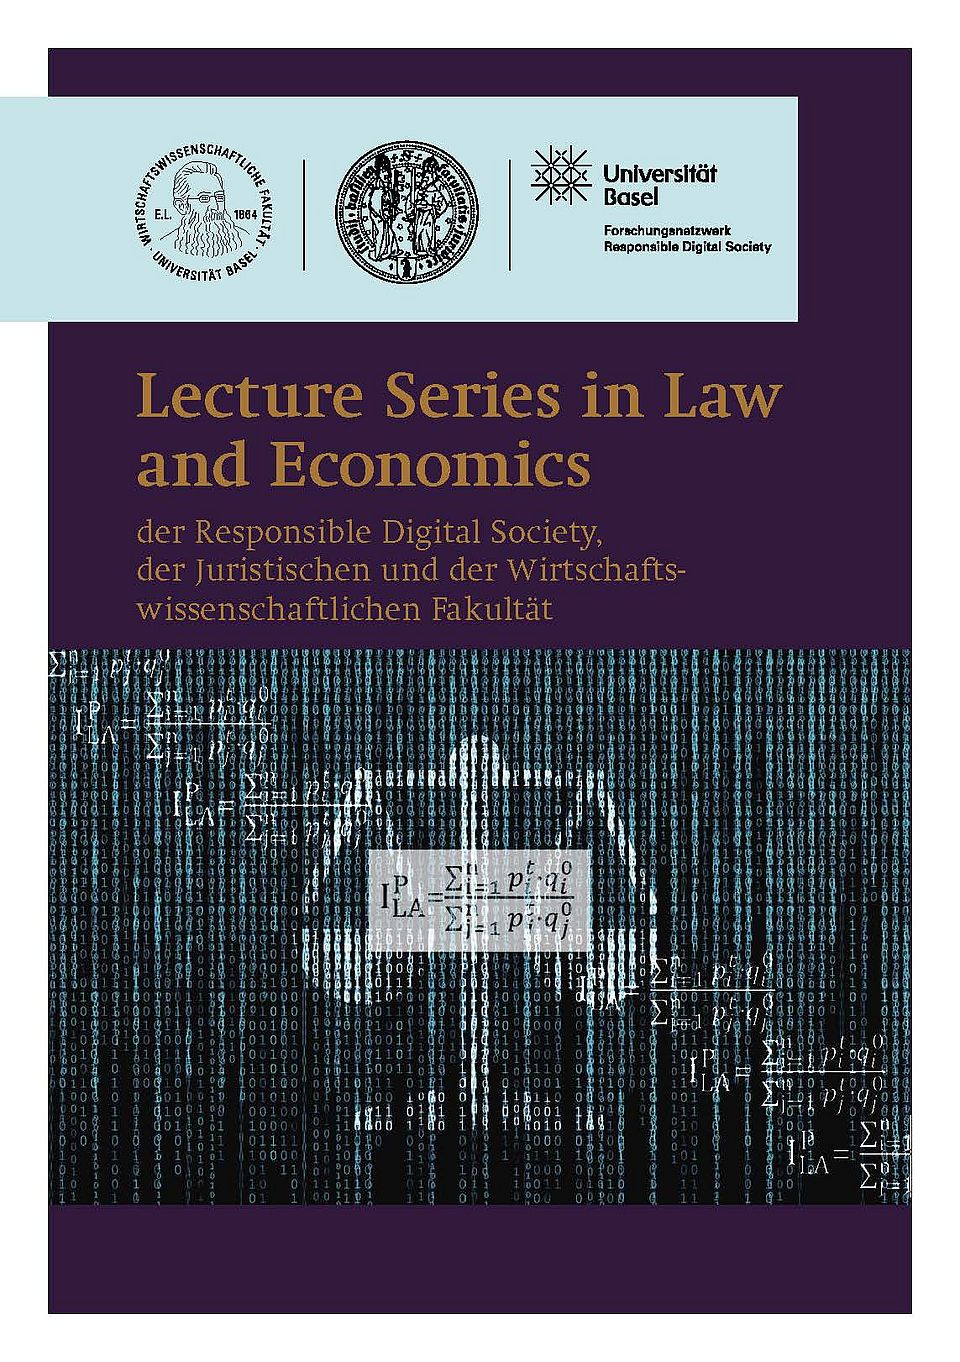 Lecture Sercies in Law and Economics